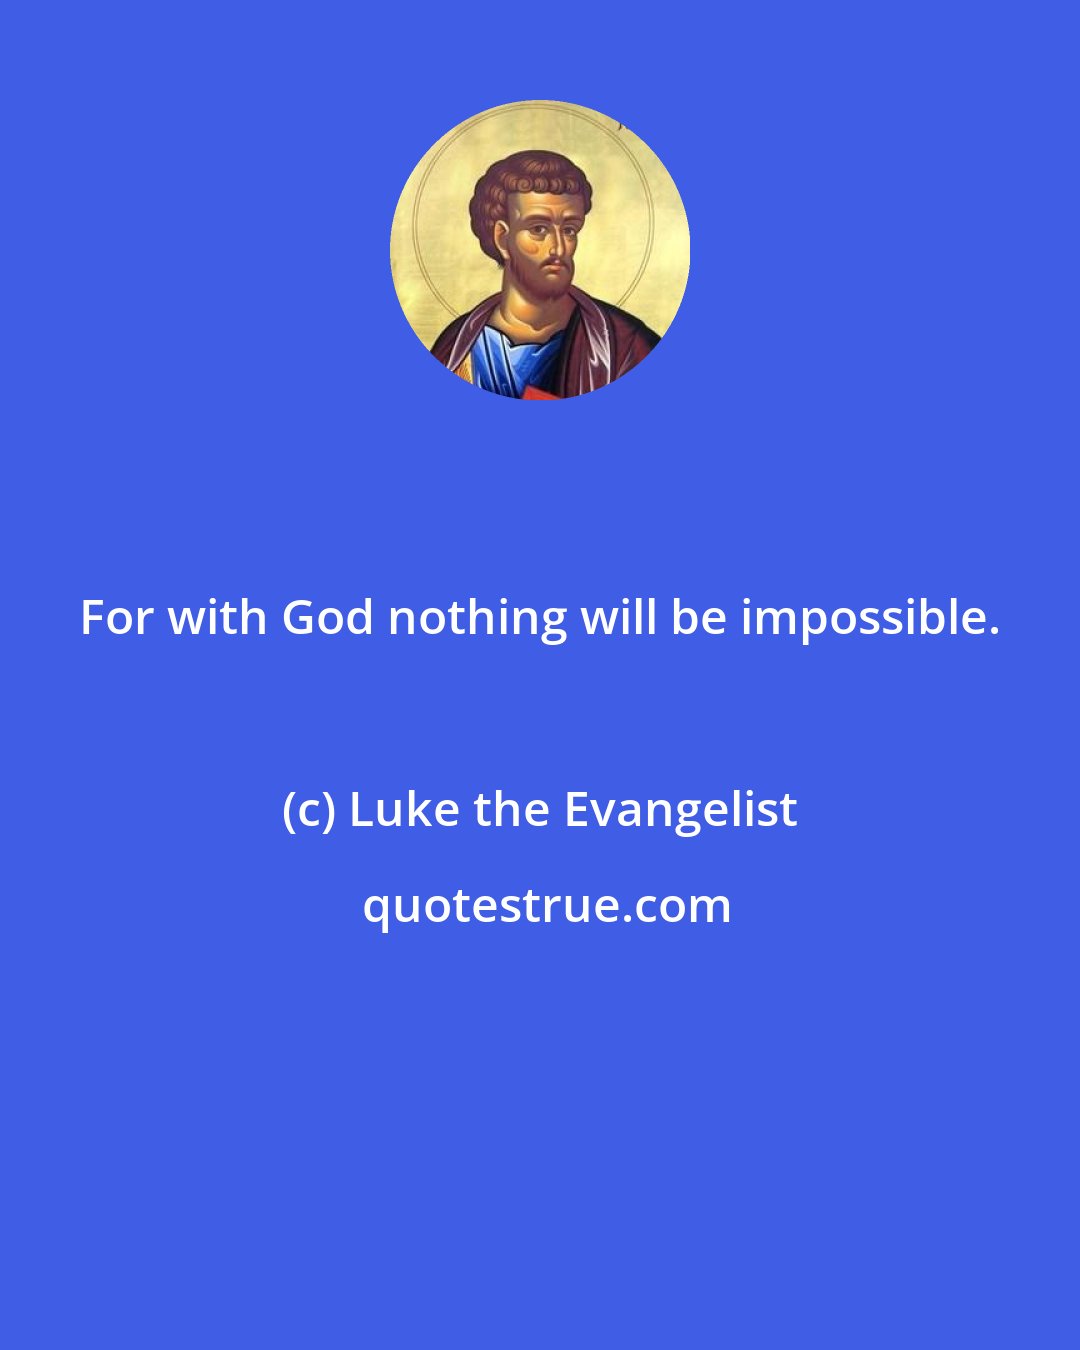 Luke the Evangelist: For with God nothing will be impossible.